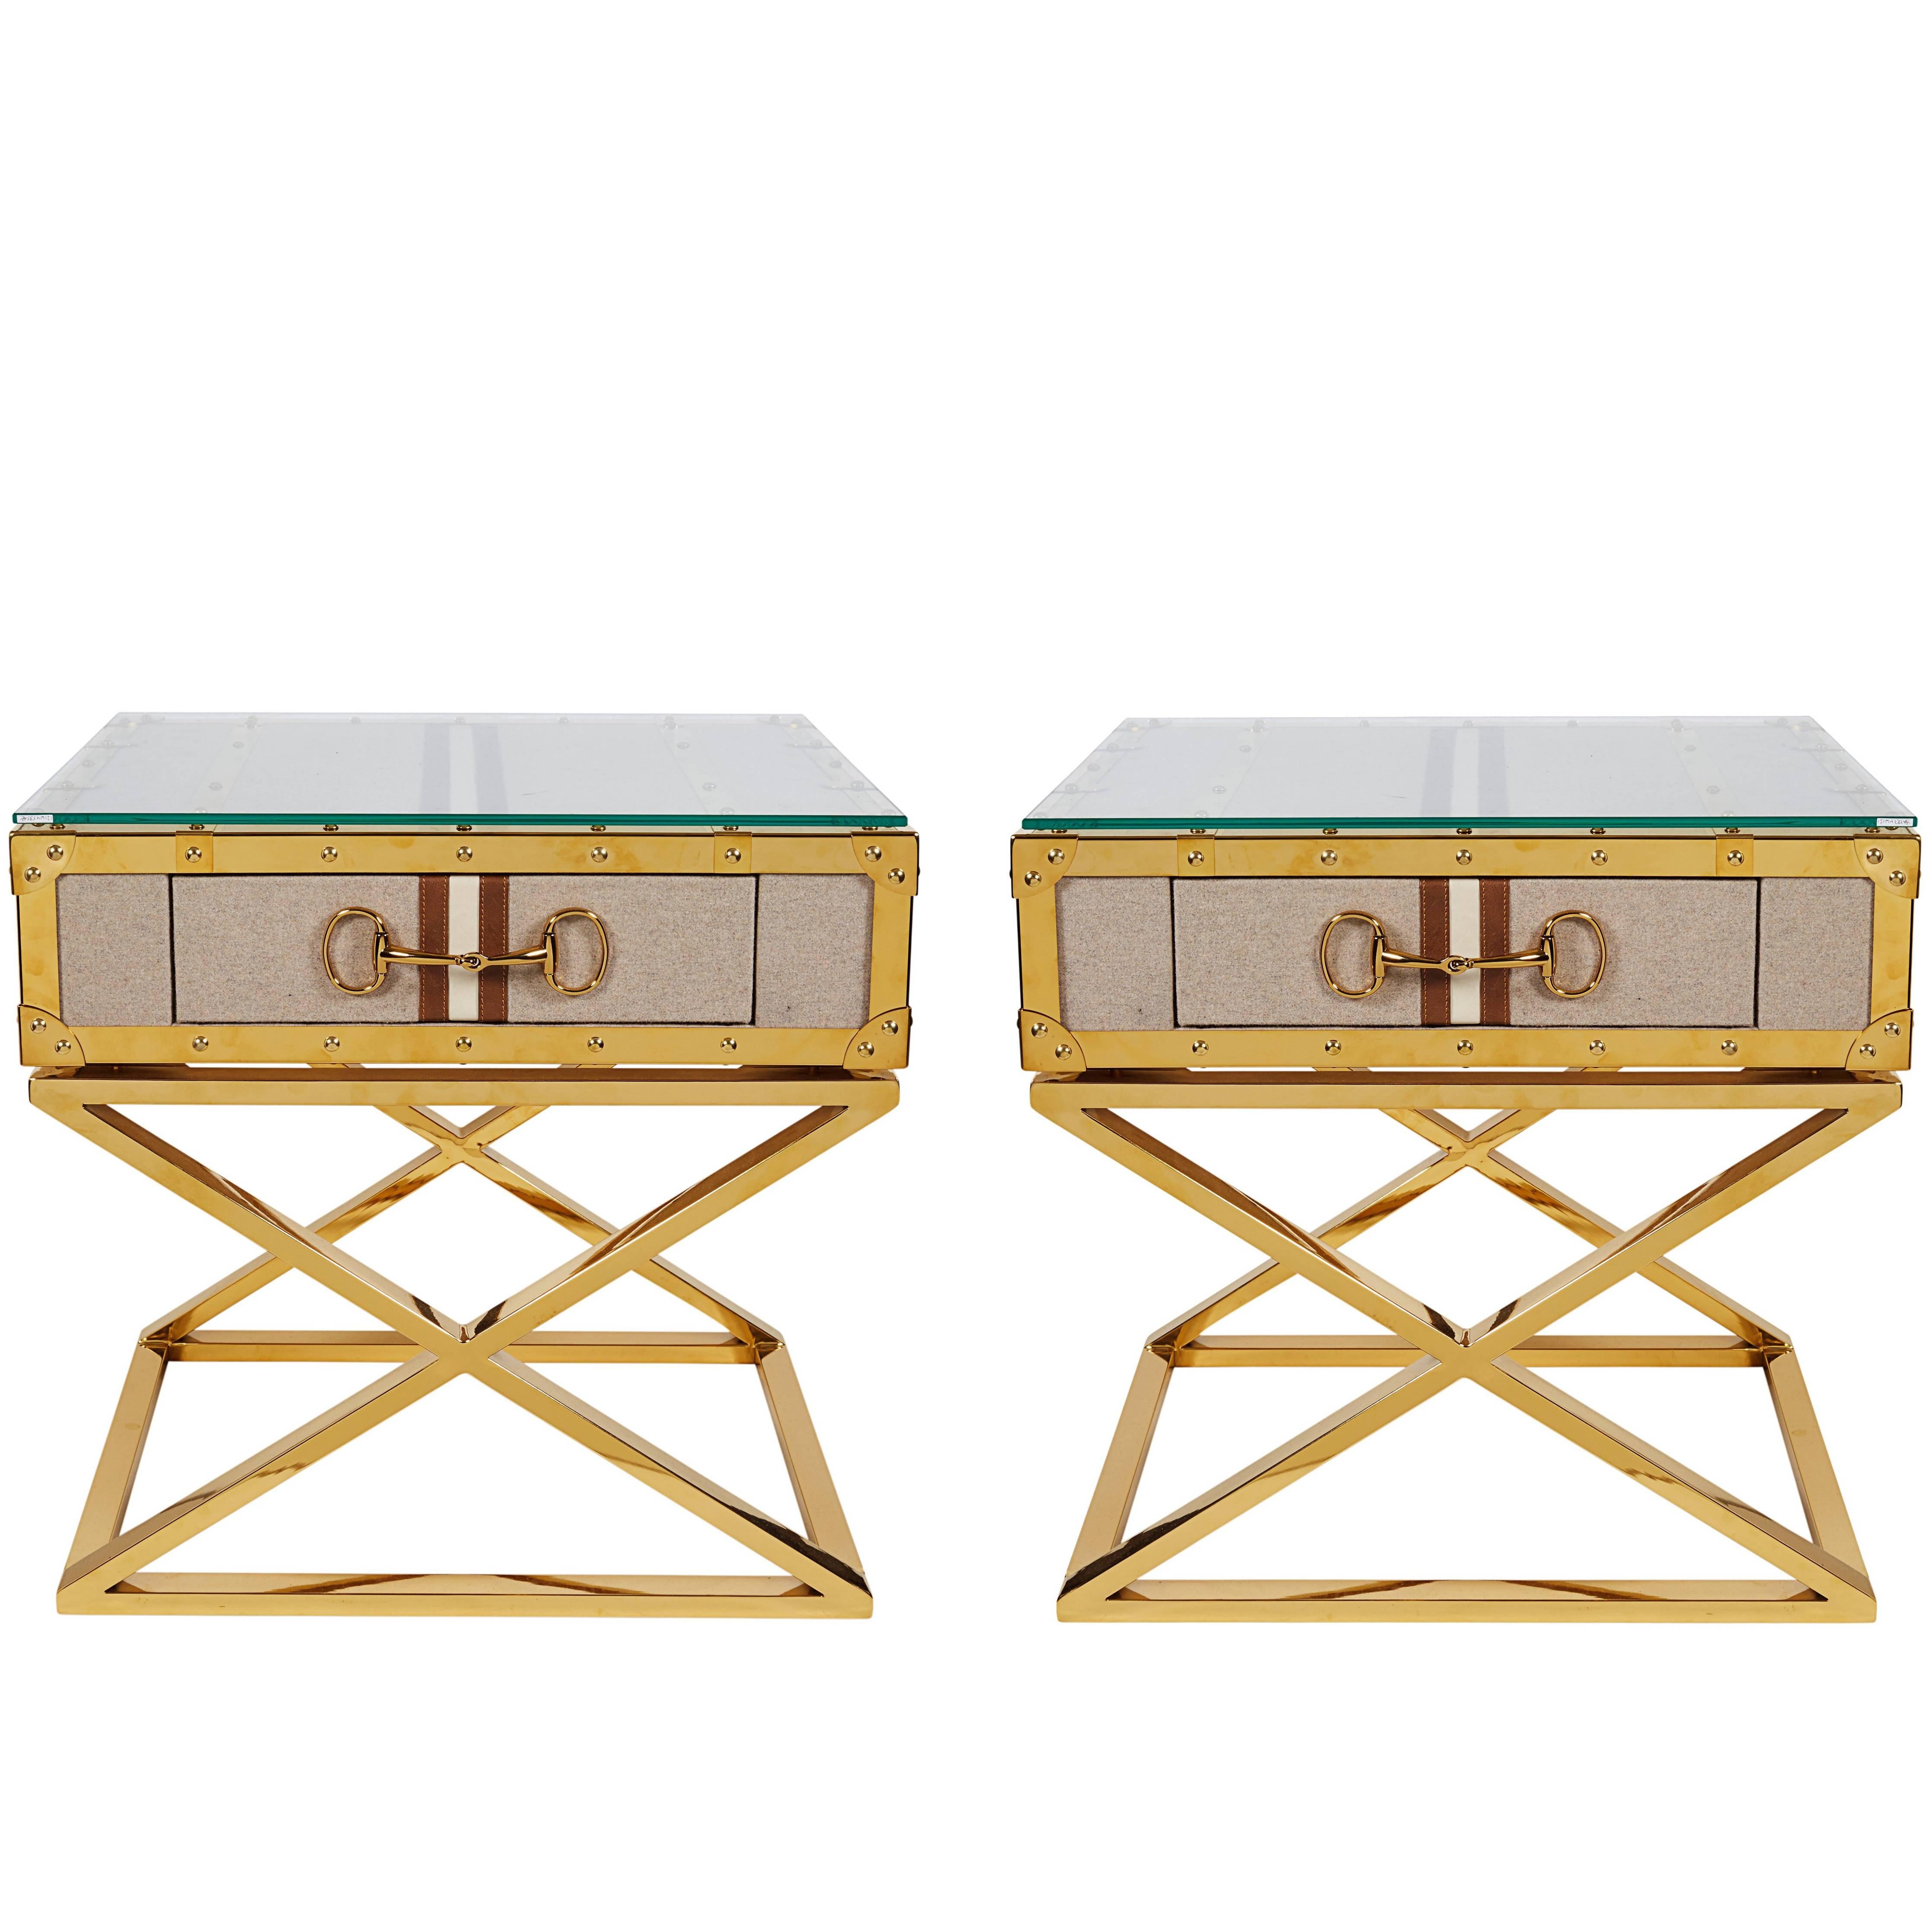 Pair Modern Contemporary Gucci Inspired Polished Brass Side Tables Nightstands